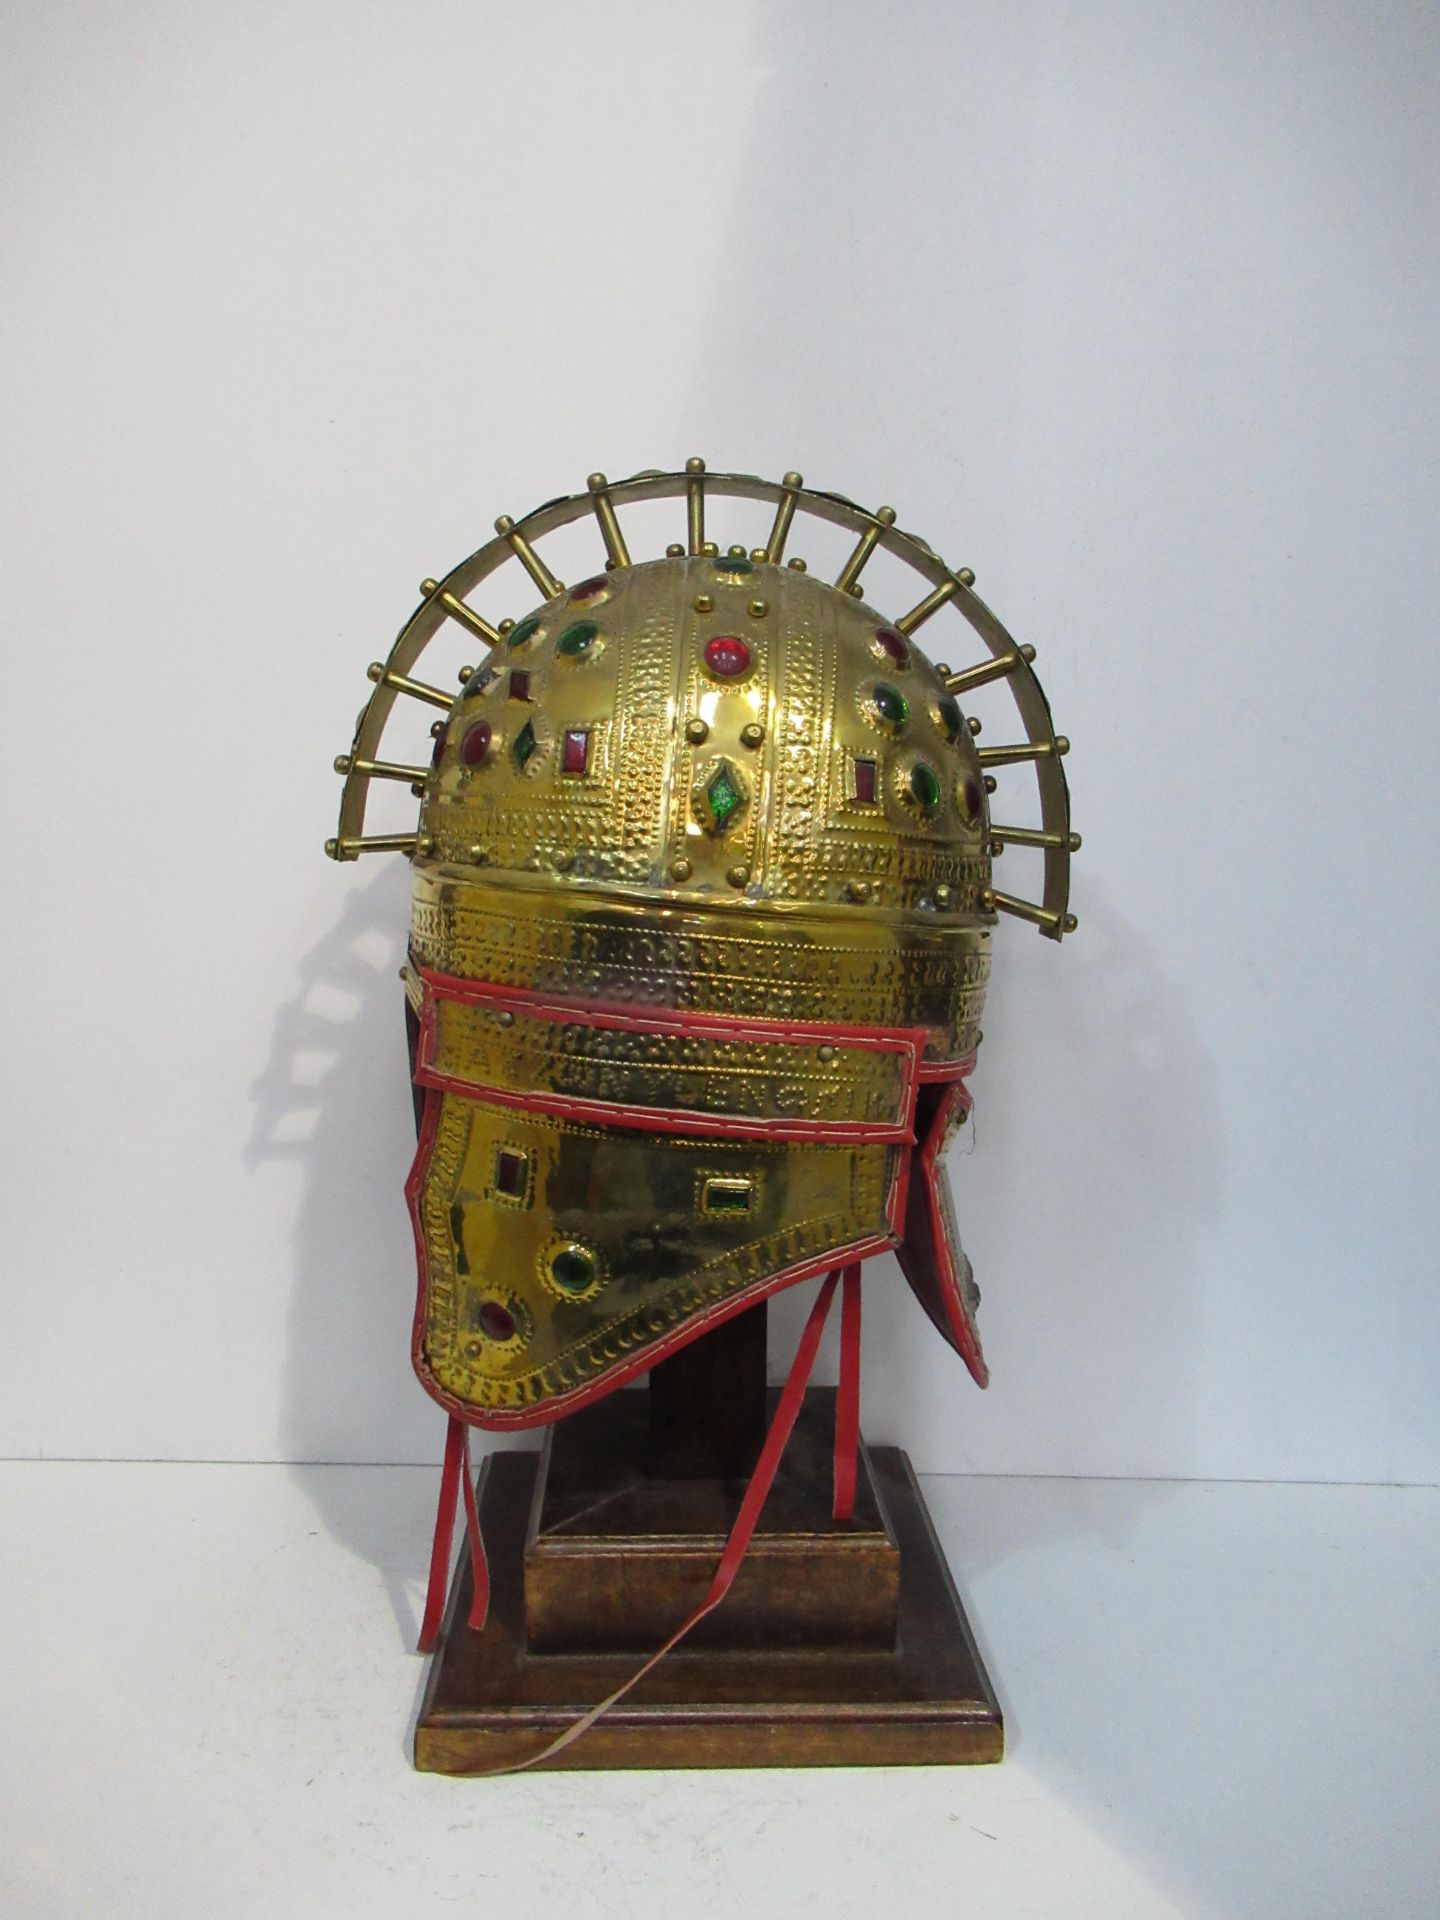 Roman 'Jewelled' Crested Reproduction Helmet with Stand - Image 4 of 4